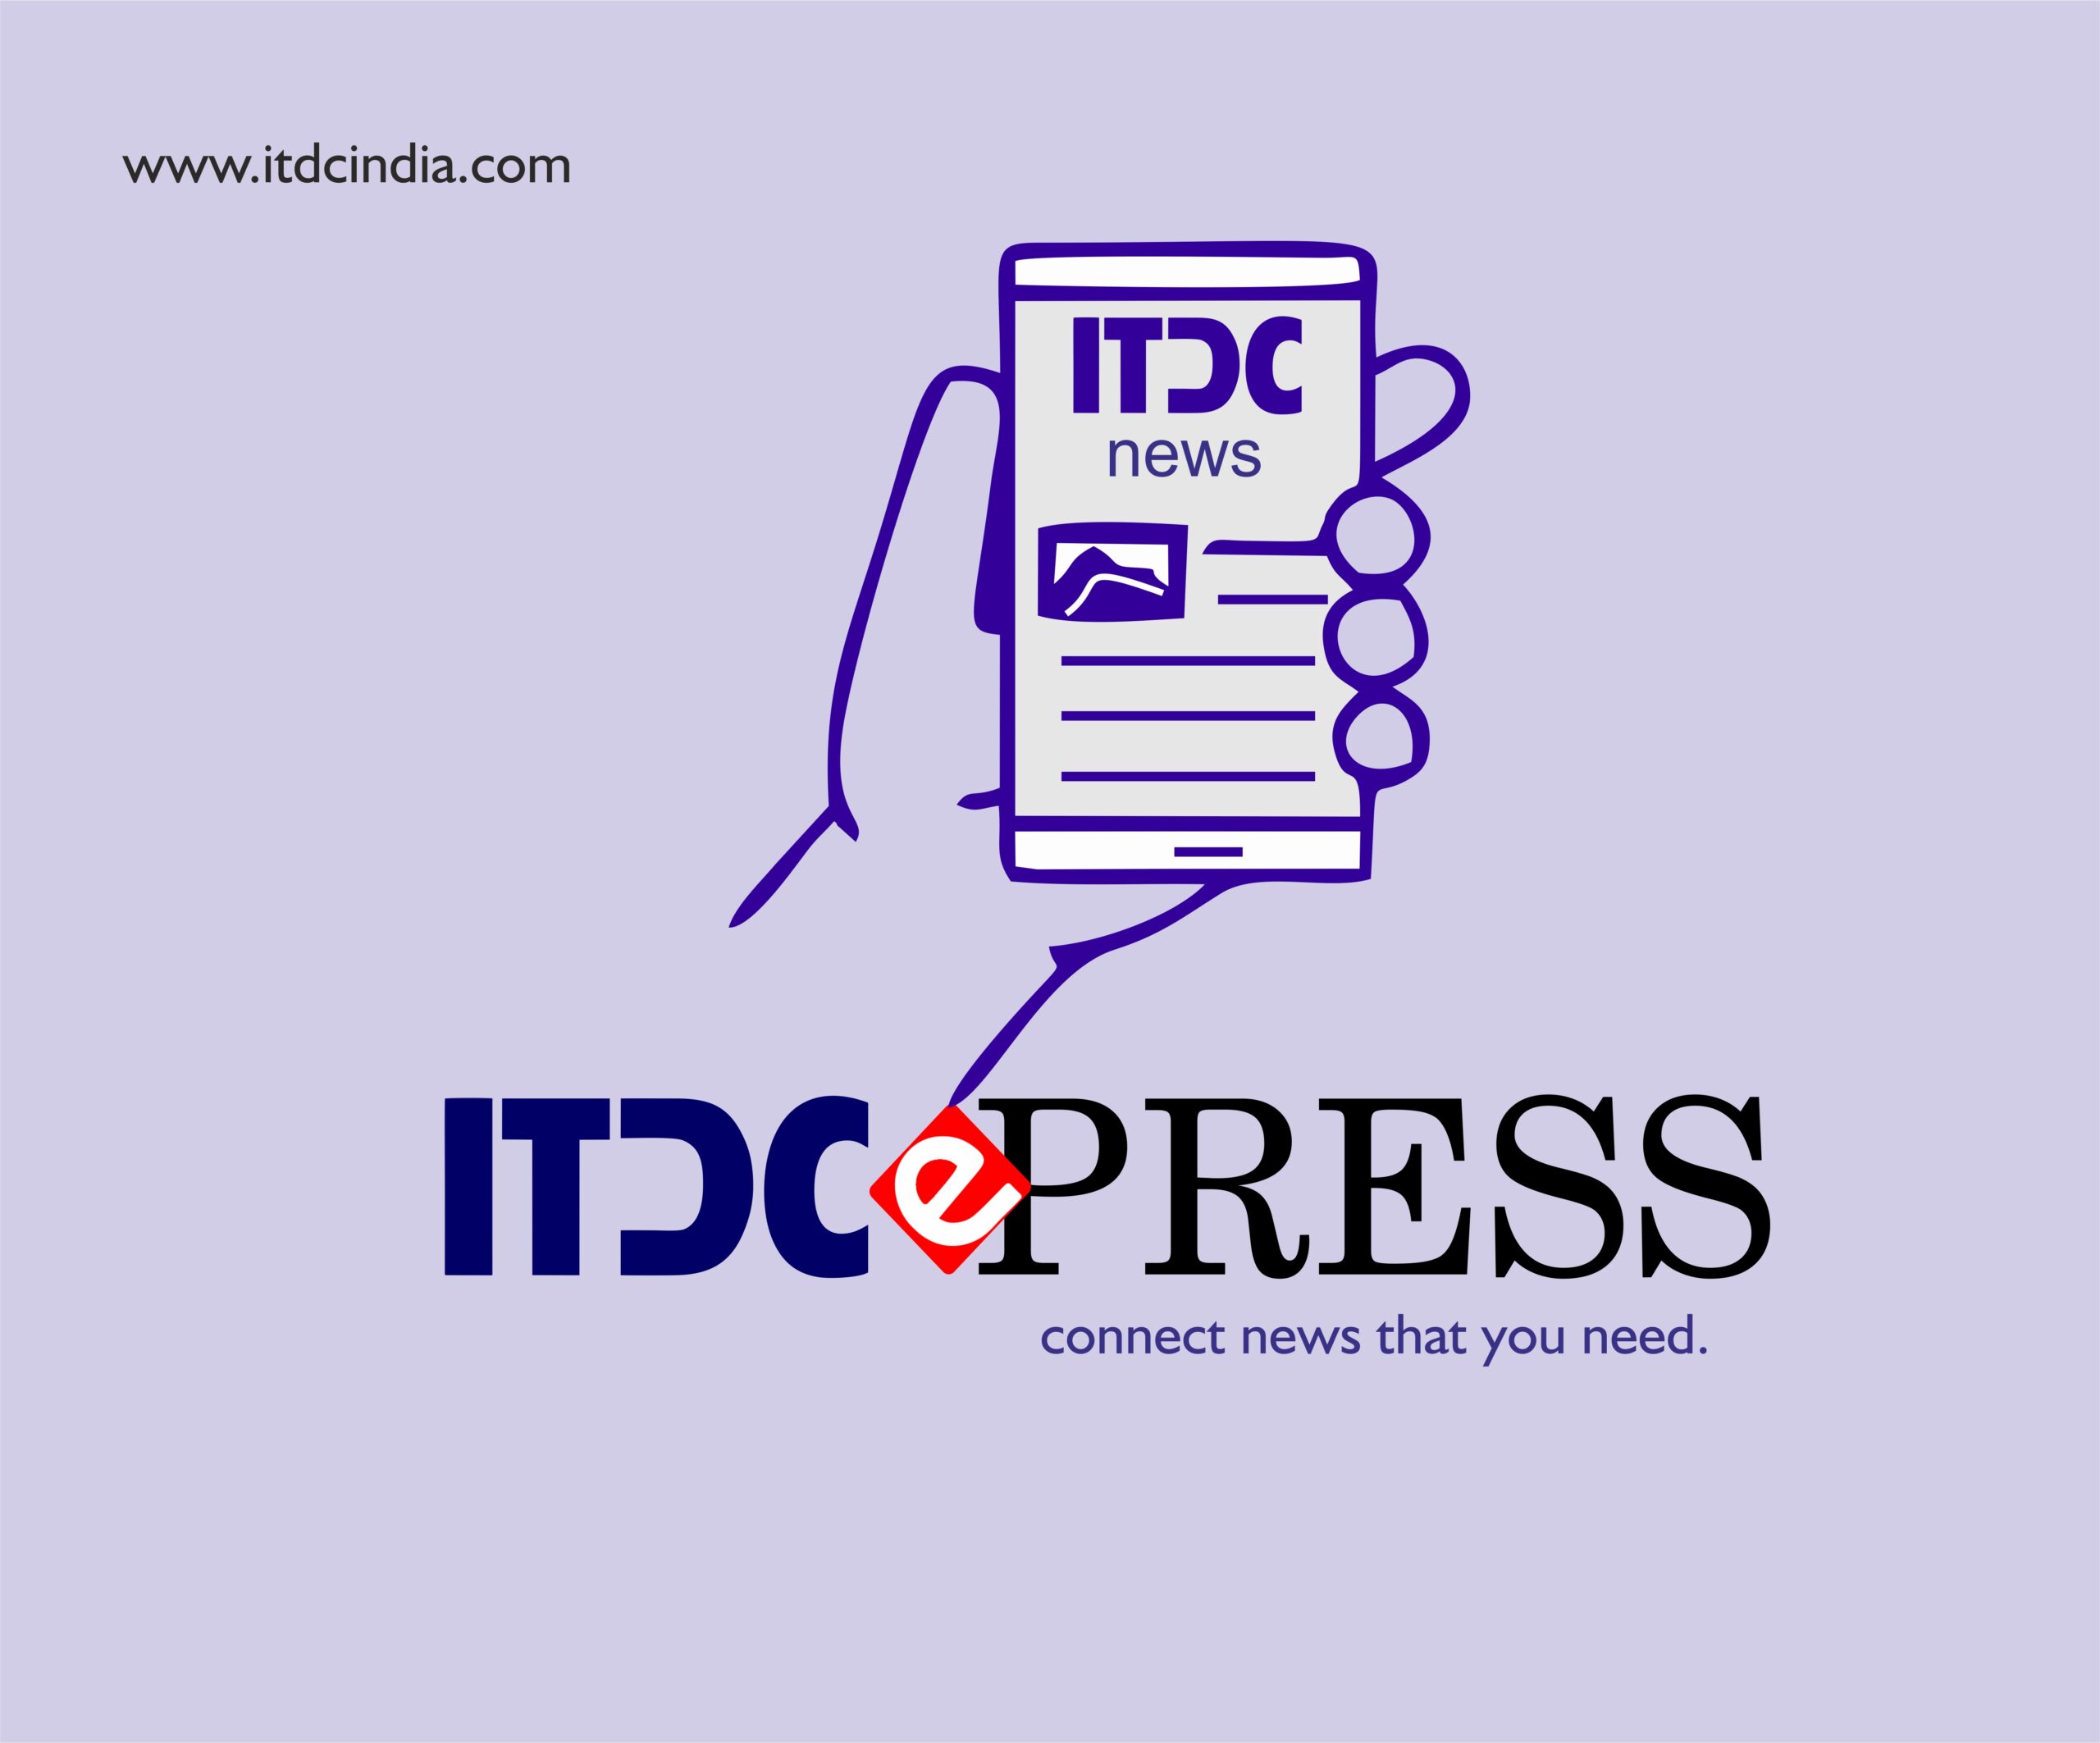 When you Notice it, it becomes News- ITDC India ePress